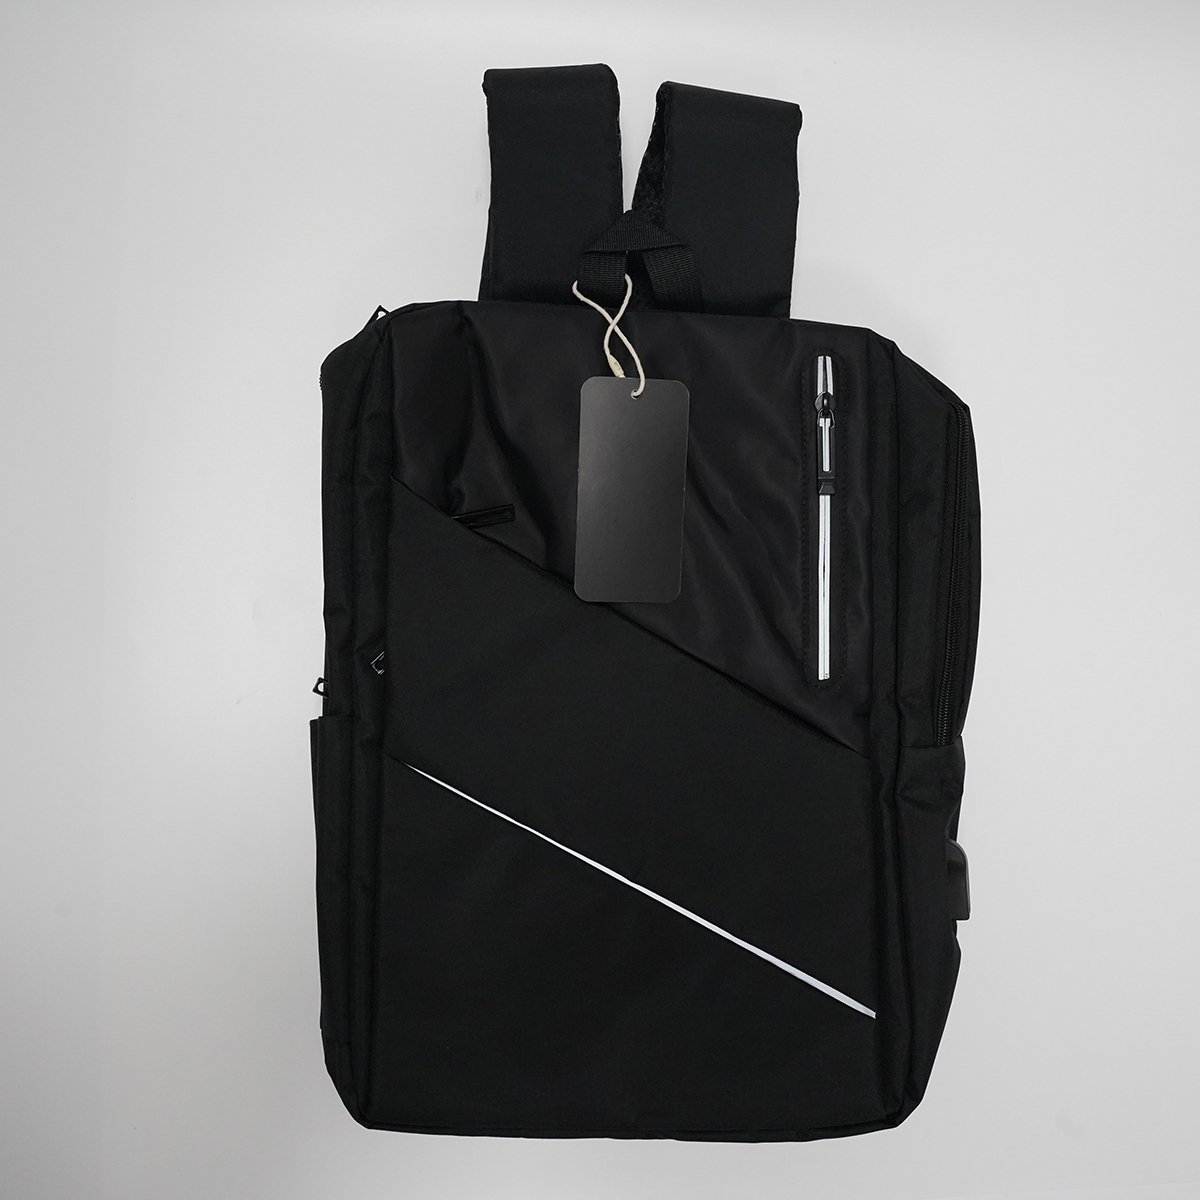 Business Casual Laptop Backpack3